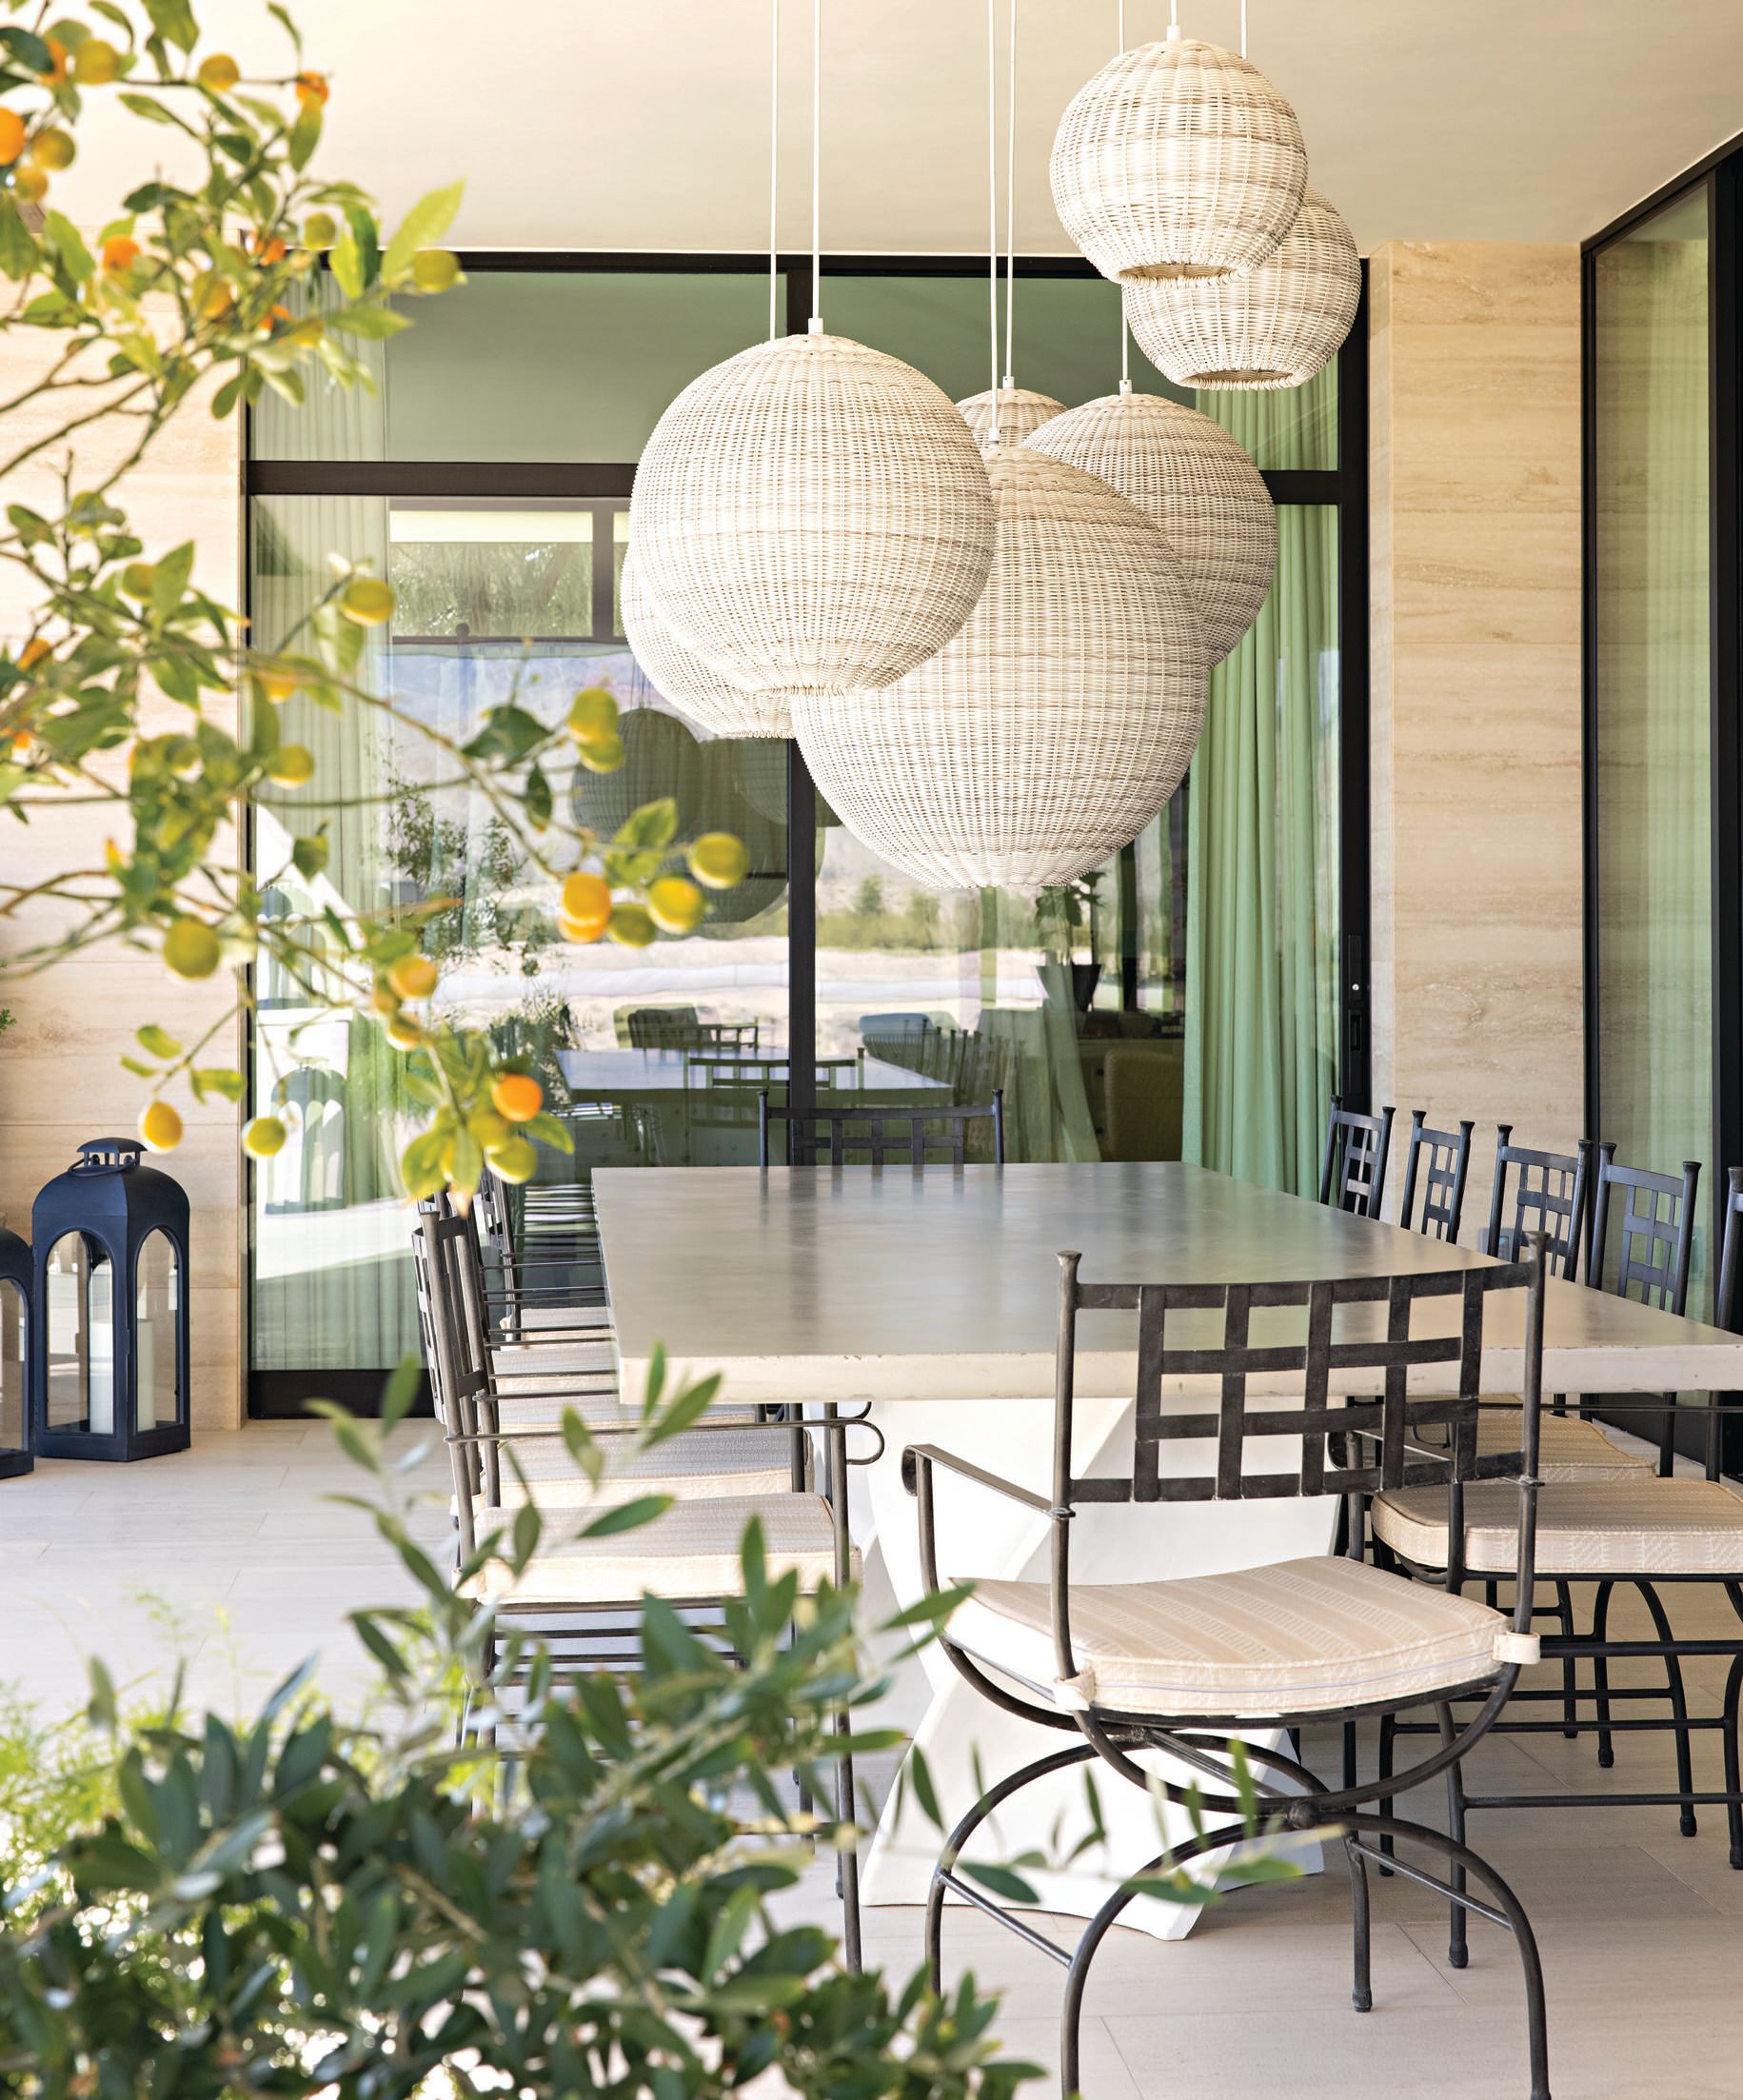 Pendant lights illuminate the outdoor dining area, where the sprawling table offers room for up to 10 guests. PHOTOGRAPHED BY KARYN MILLET PHOTOGRAPHY